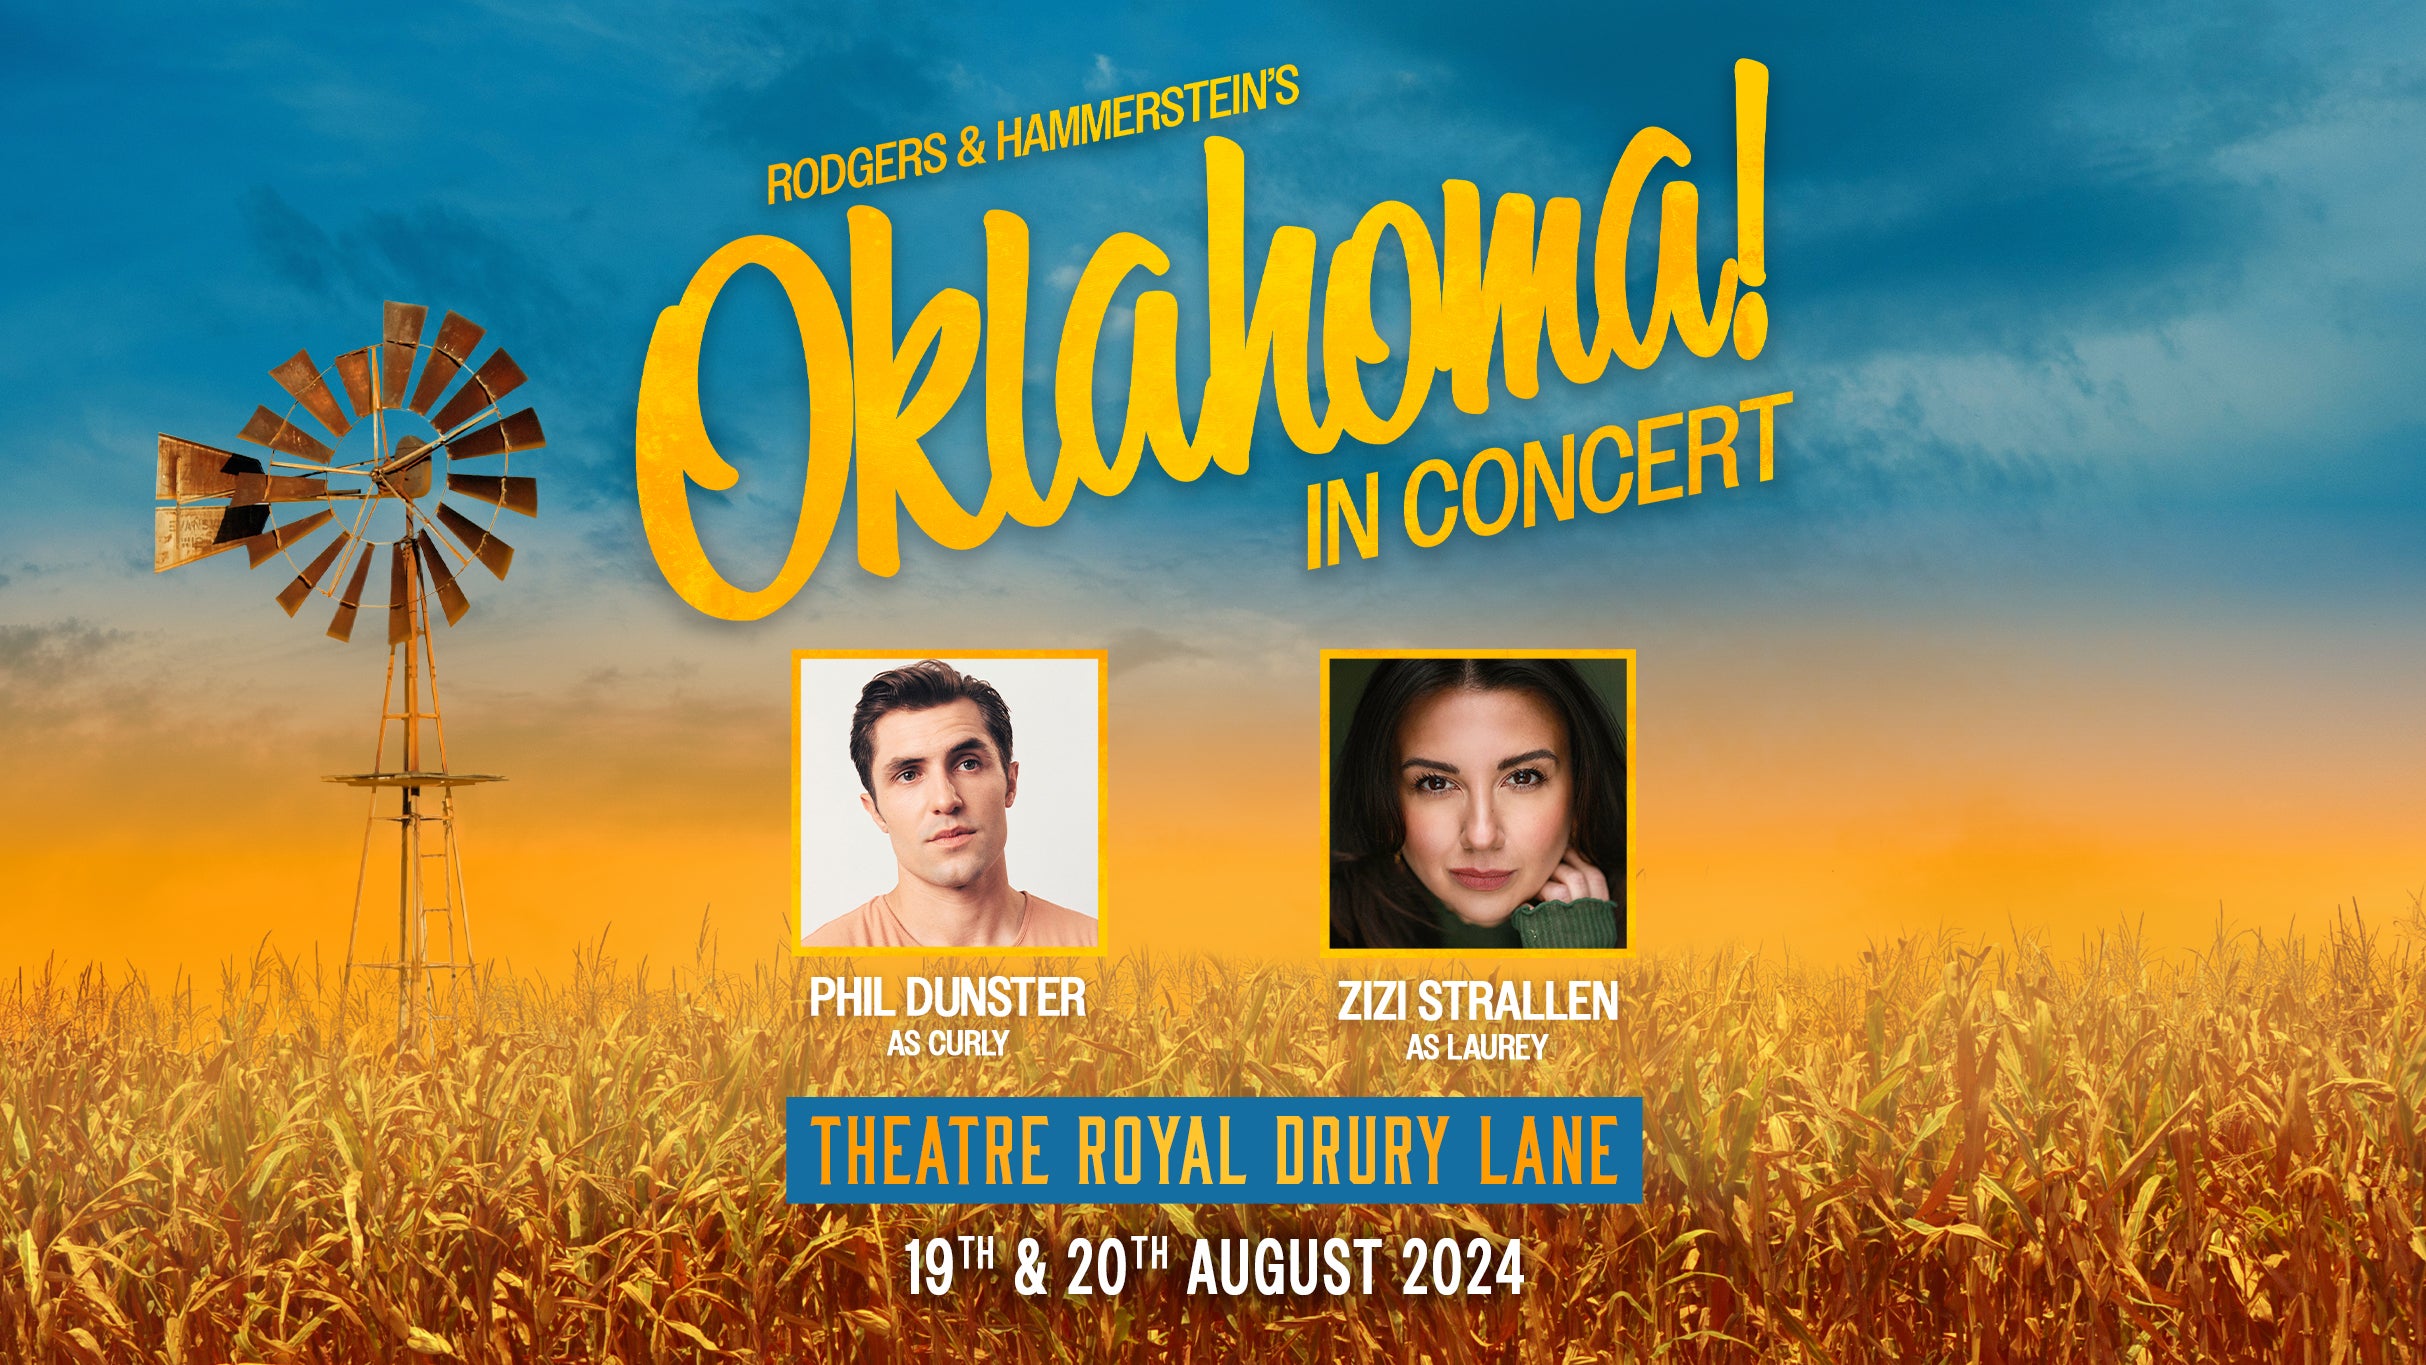 Rodgers & Hammerstein's Oklahoma - In Concert